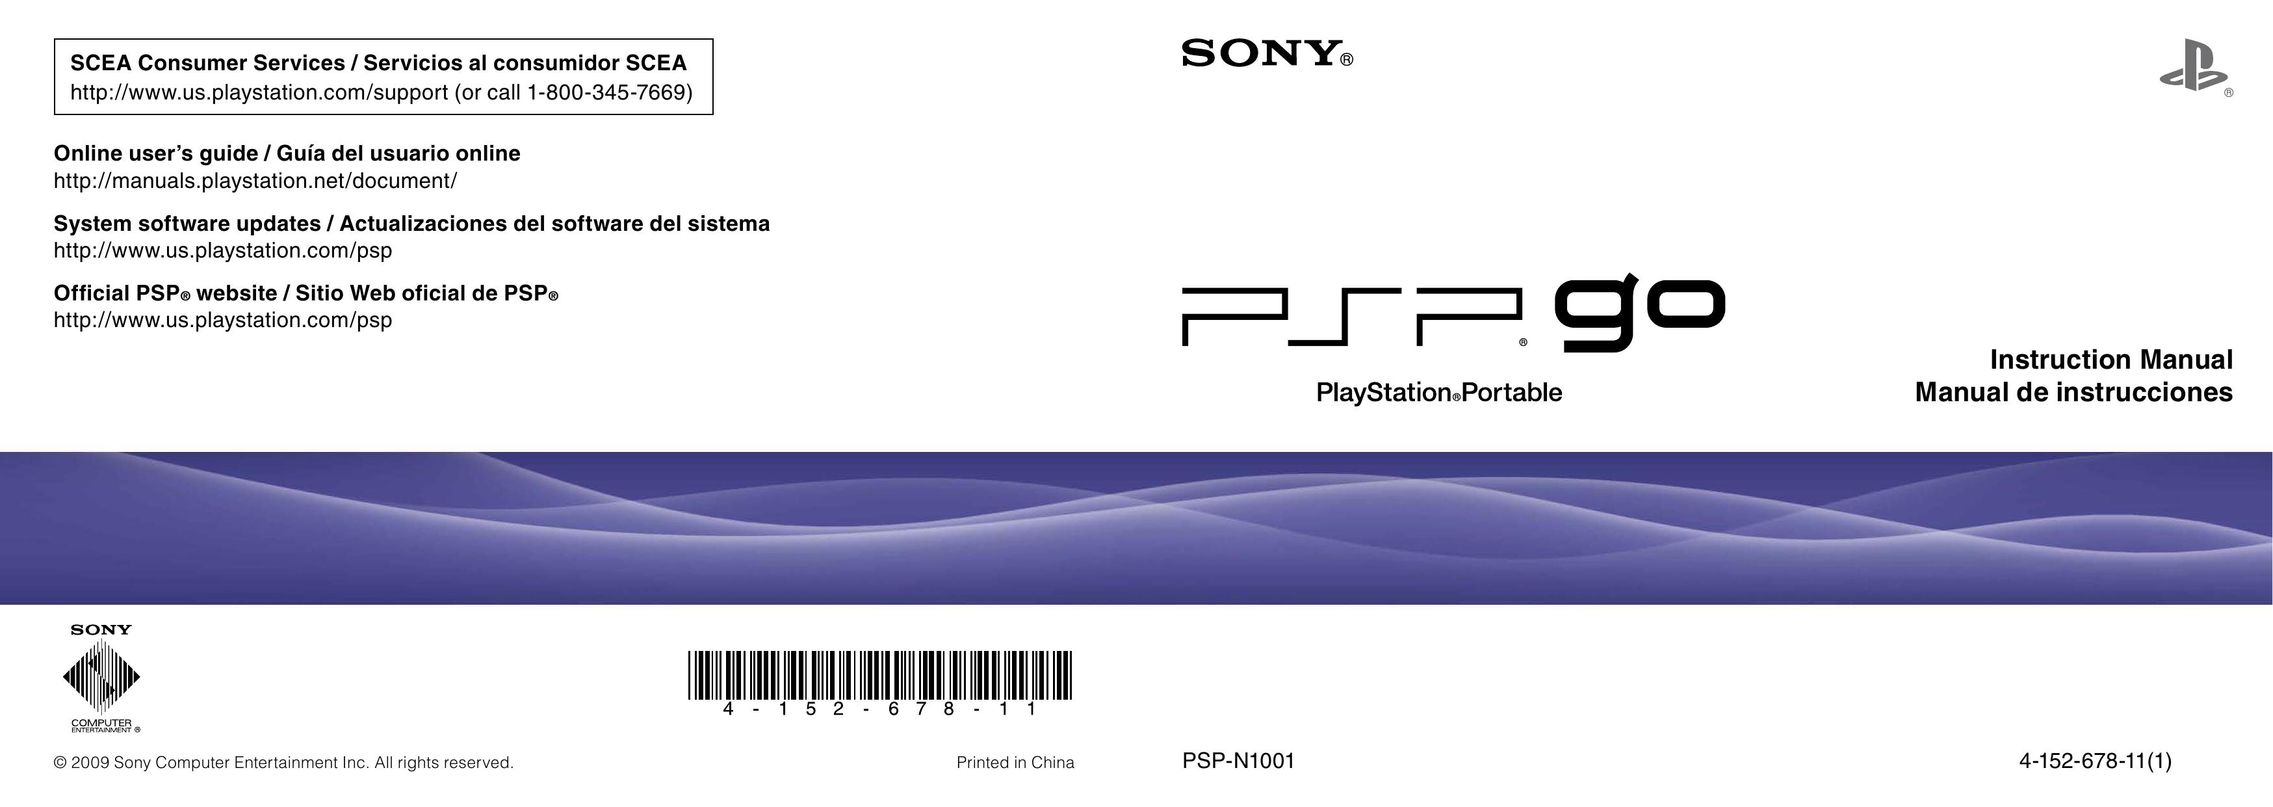 Sony PSP98022 Handheld Game System User Manual